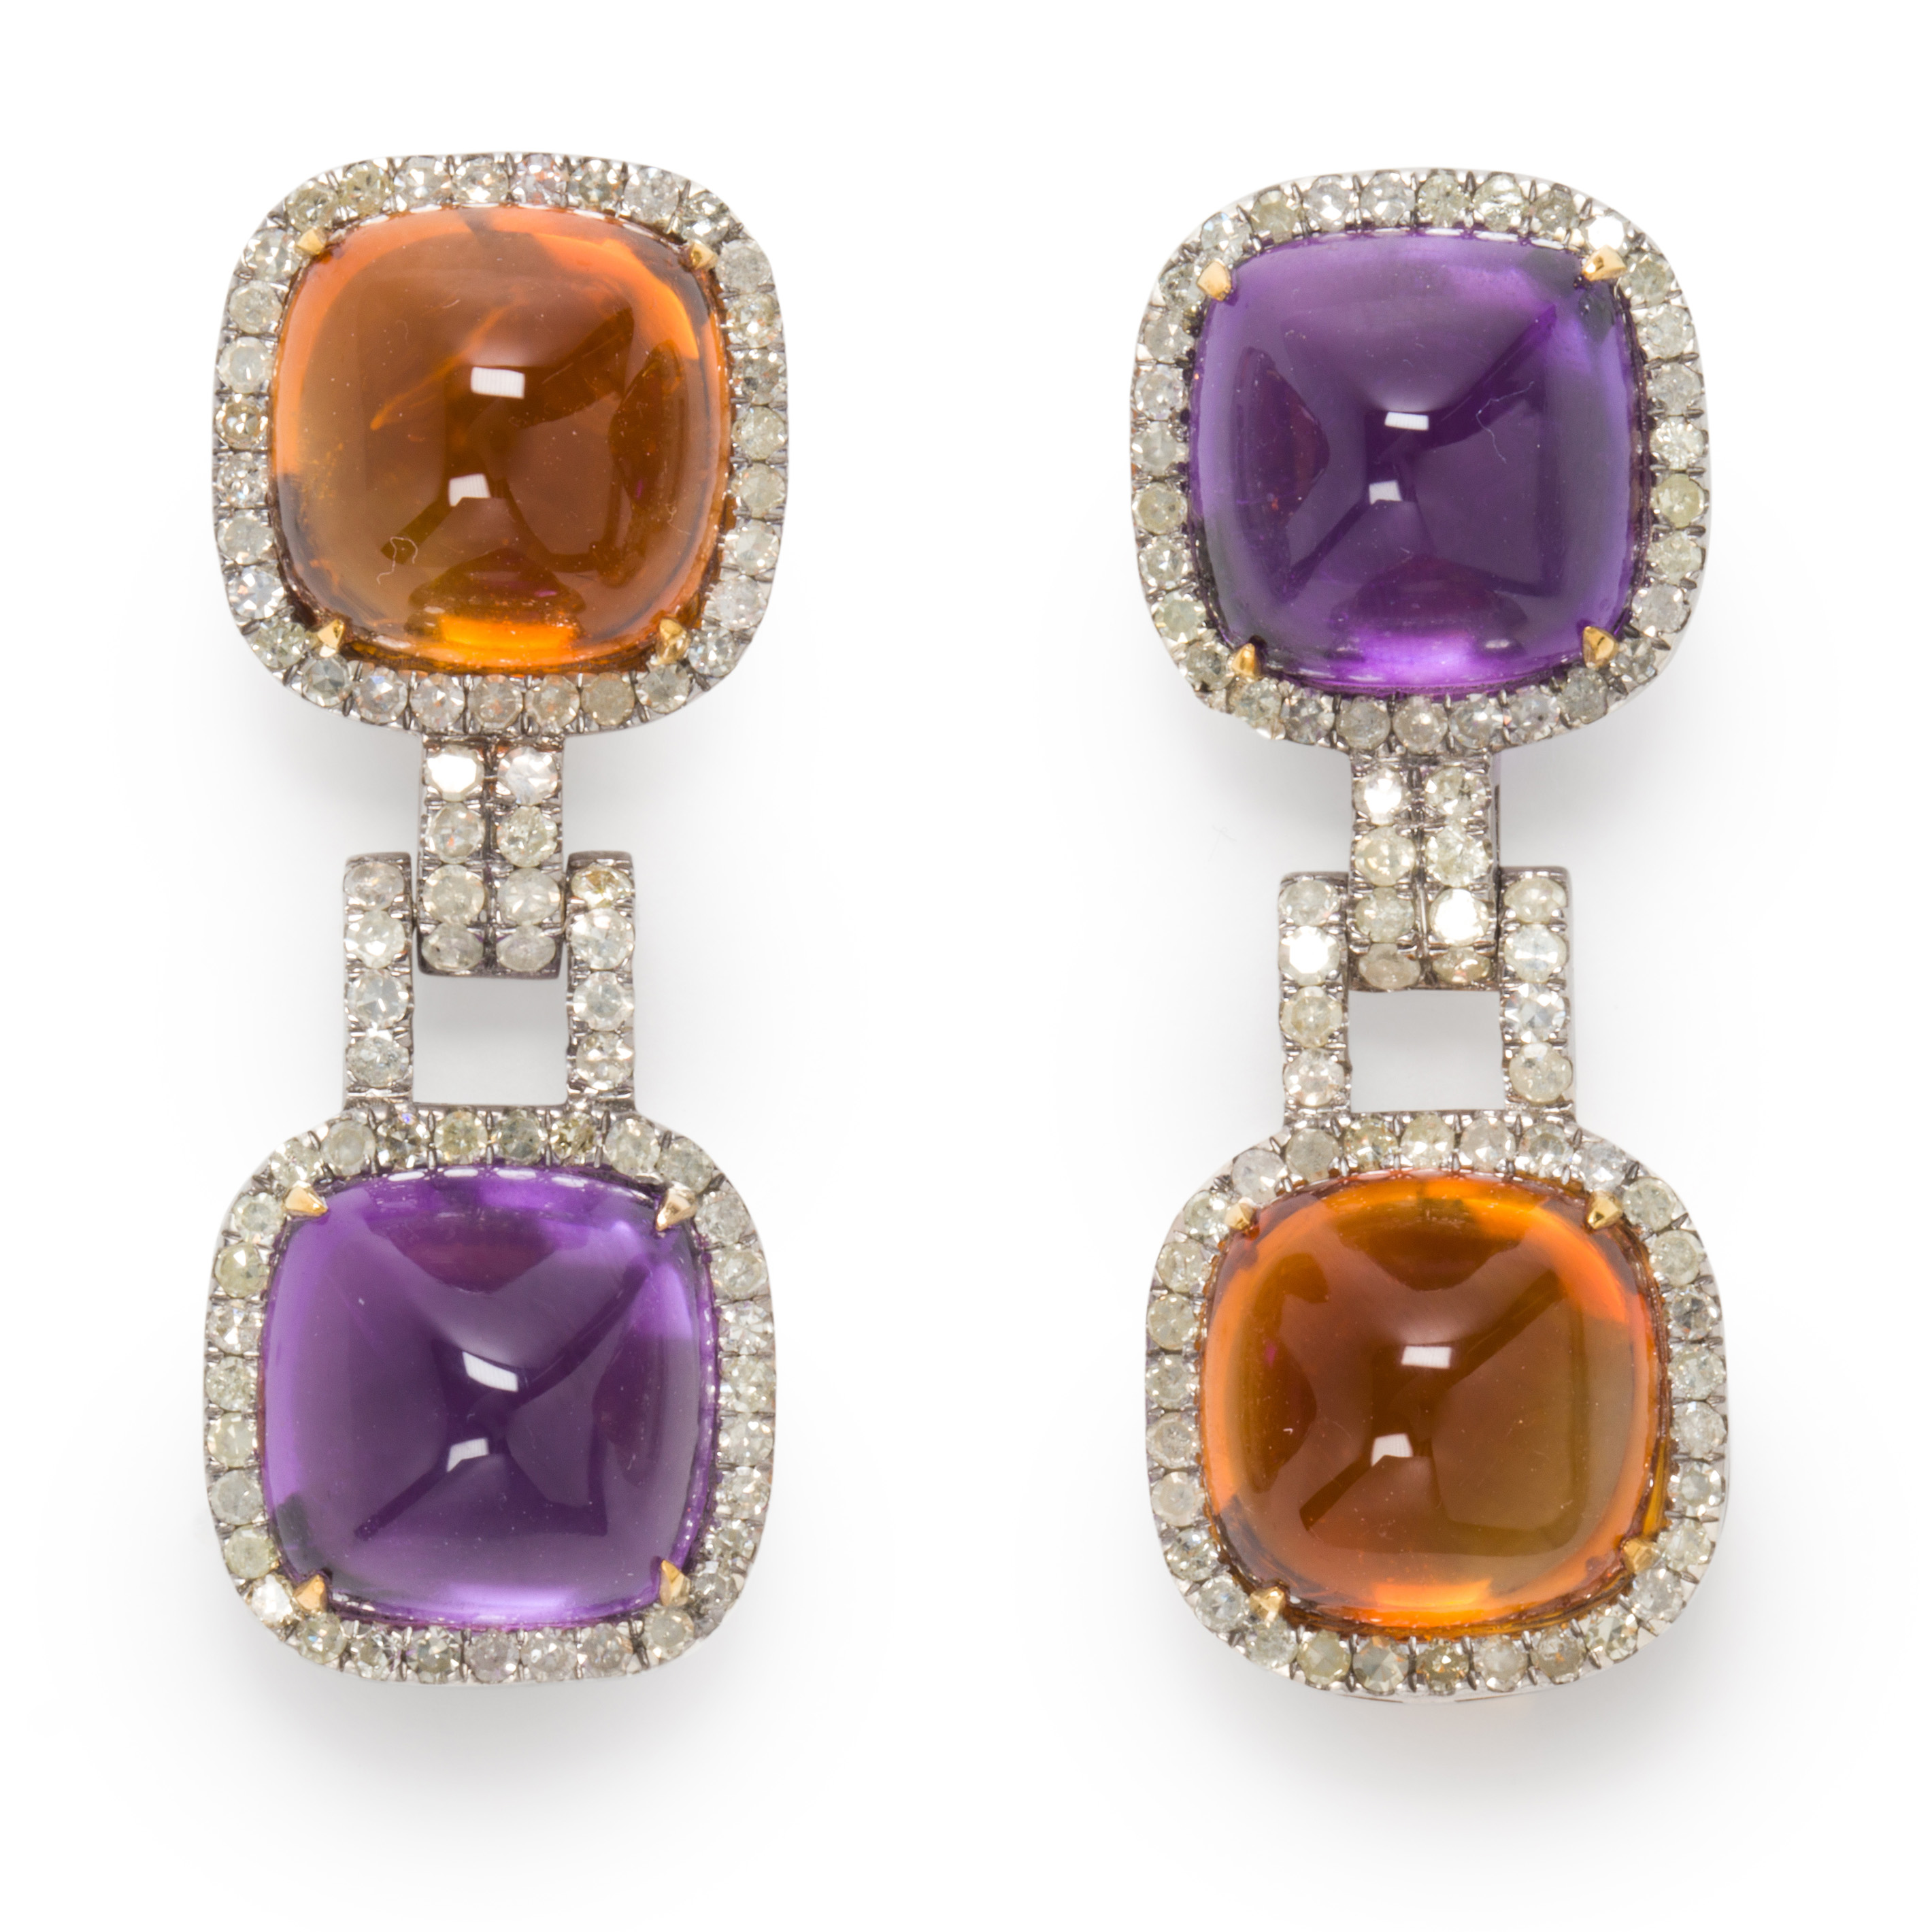 A PAIR OF CITRINE AMETHYST AND 3a41a3